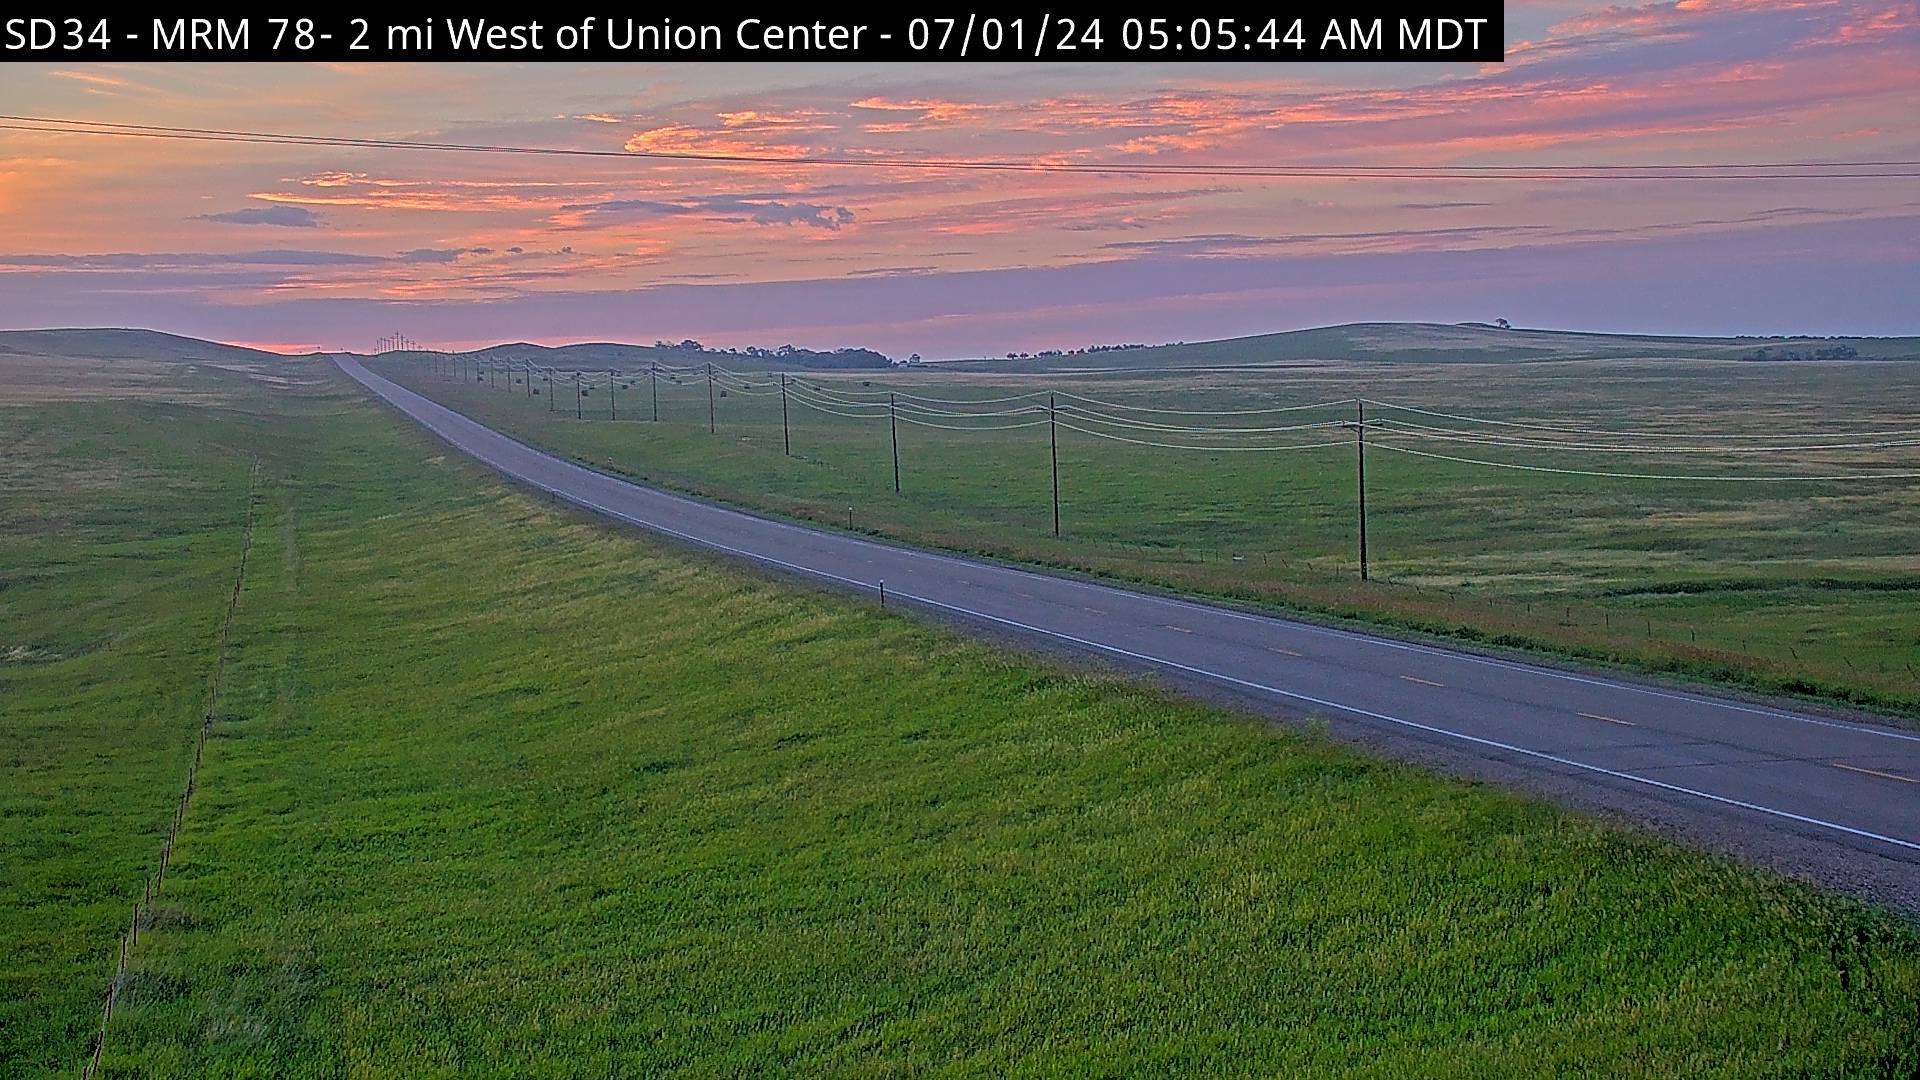 Traffic Cam 2 miles west of town along SD-34 and MP 78 - East Player